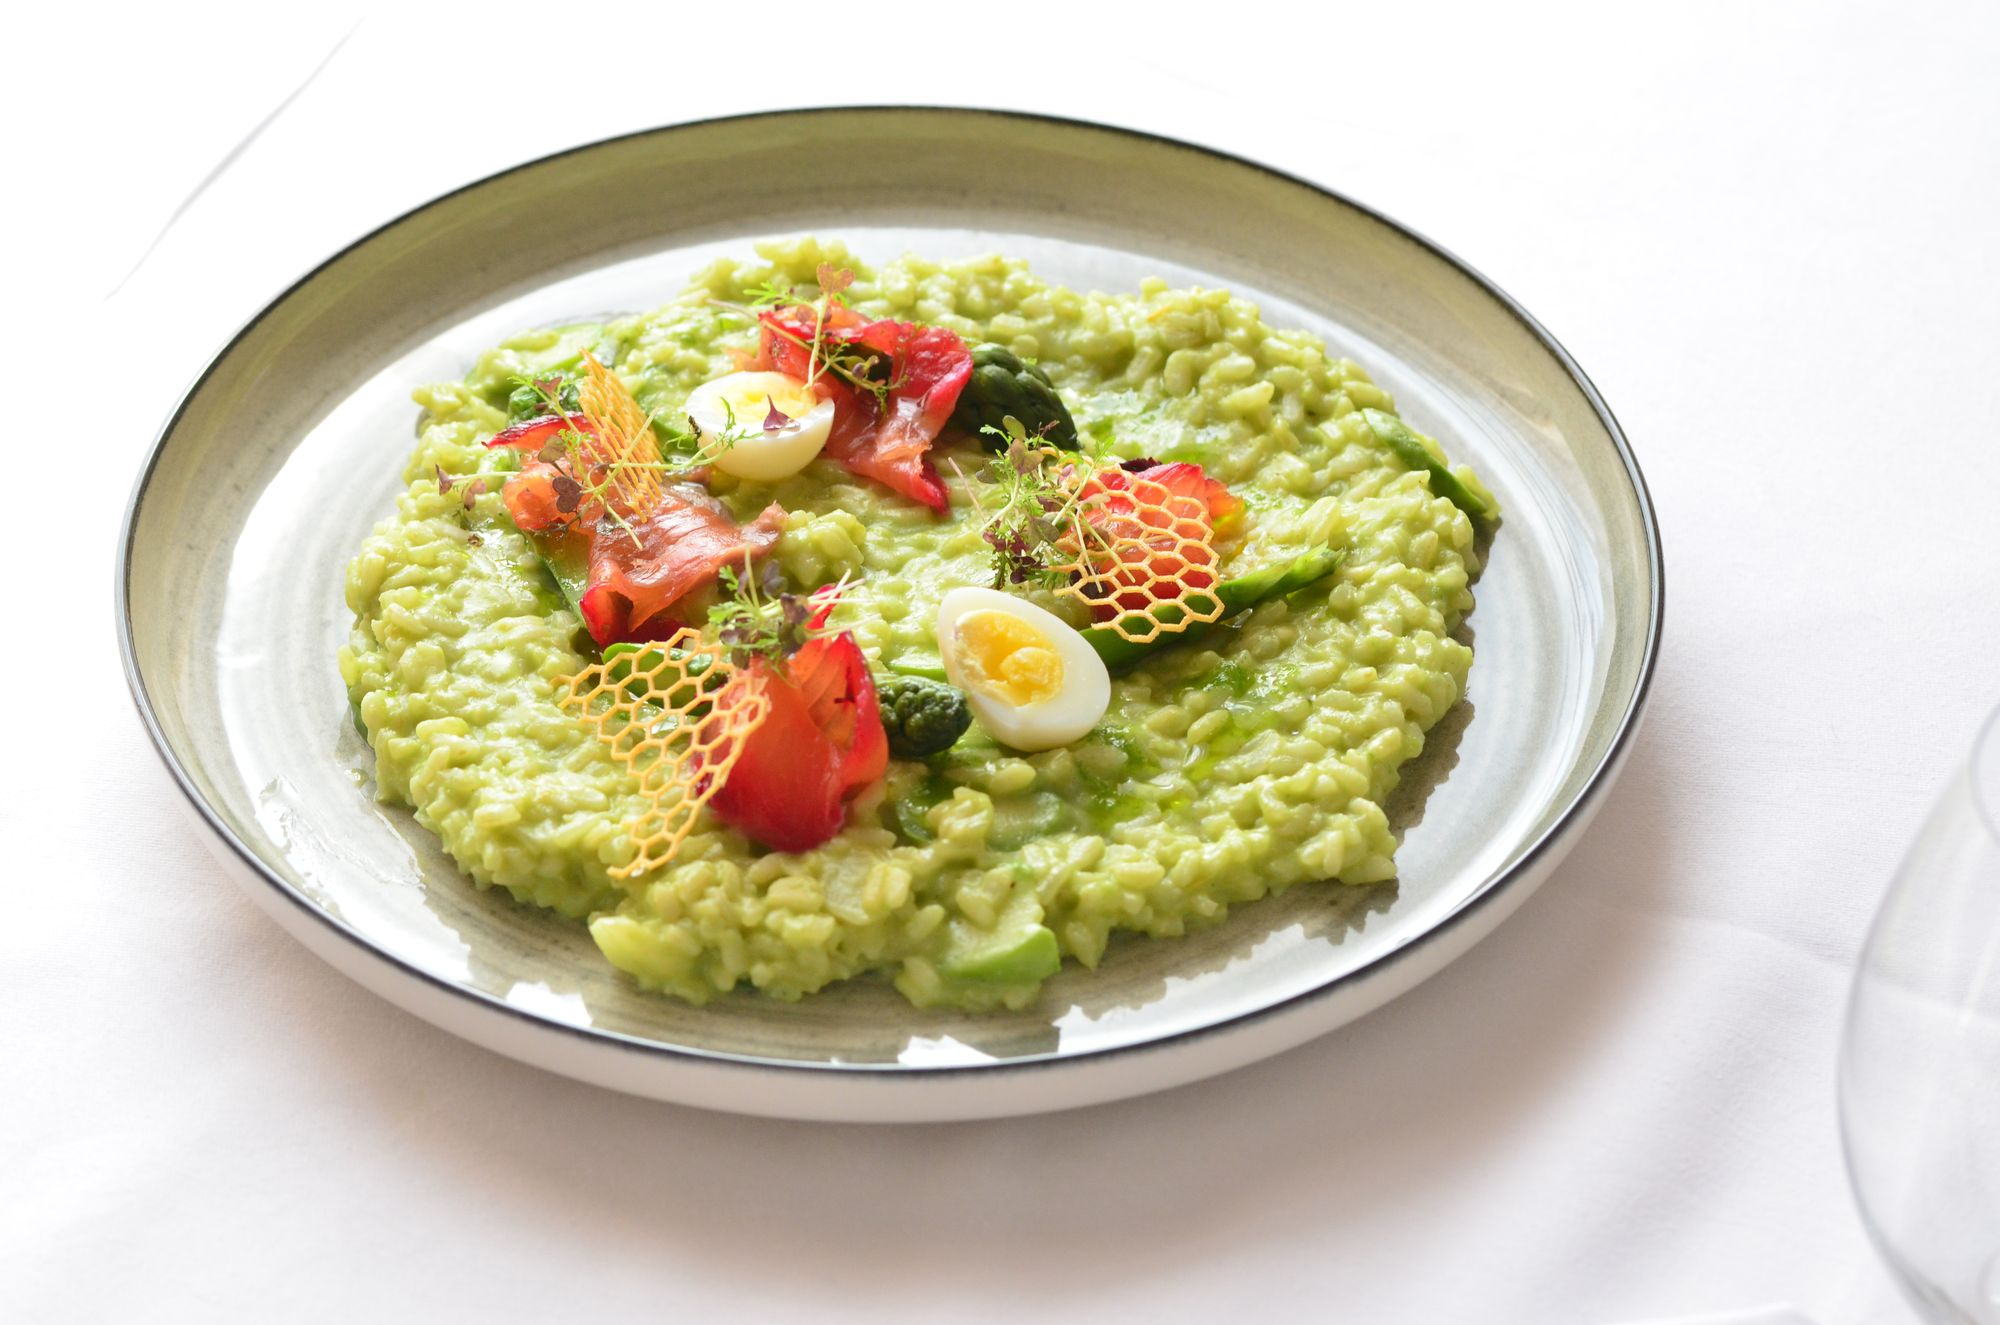 Watercress and Goat’s Cheese Risotto